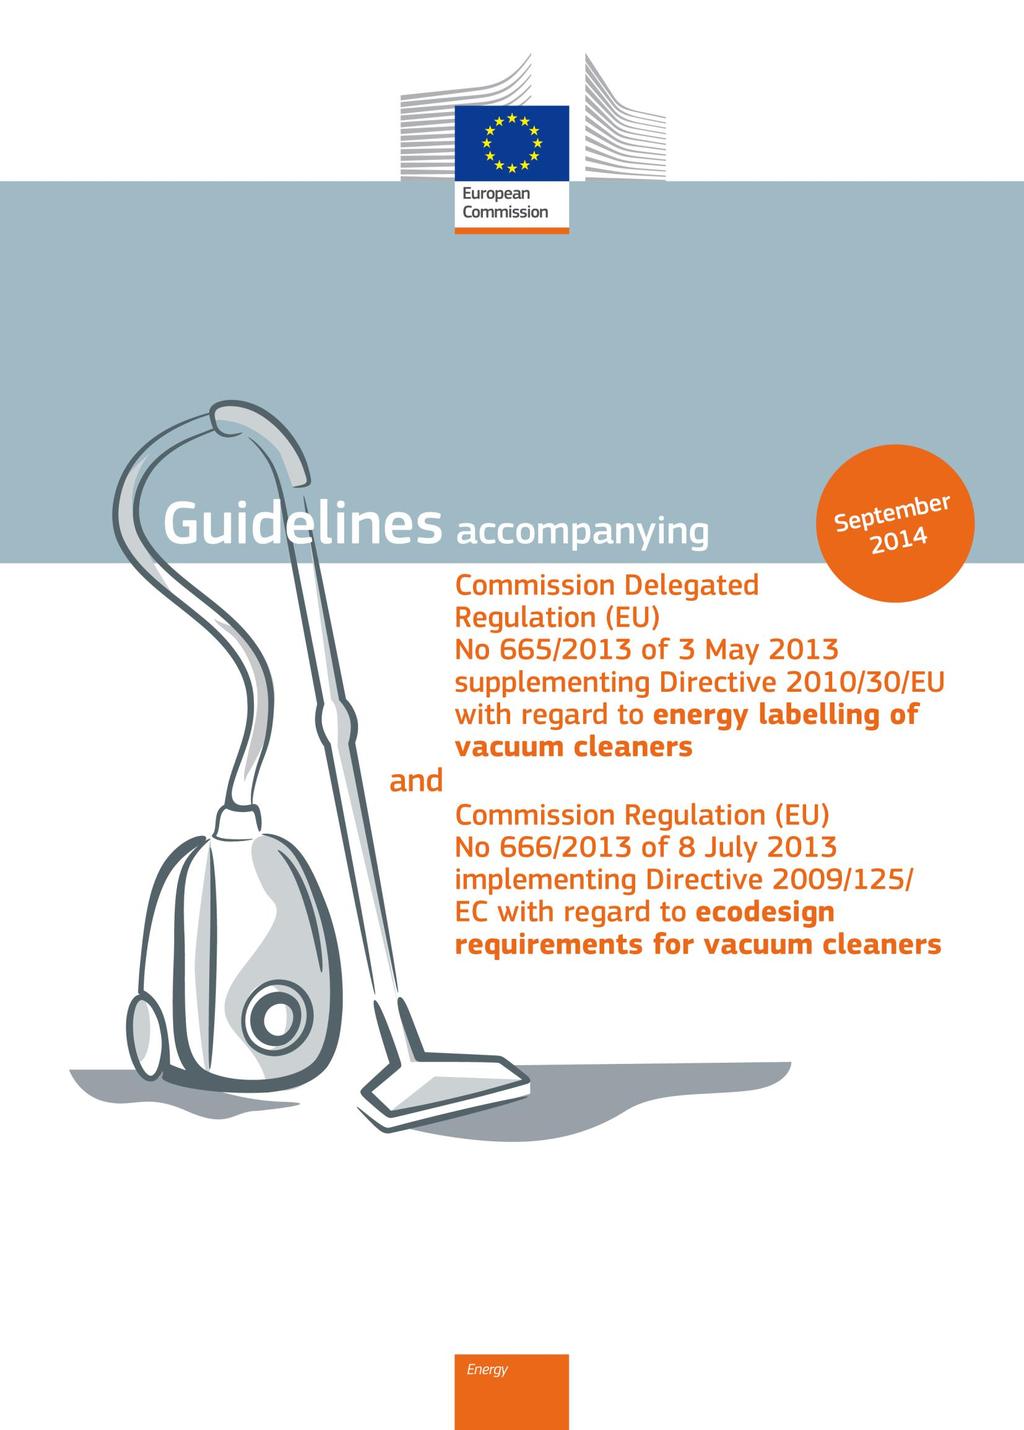 supplementing Directive 2010/30/EU with regard to energy labelling of vacuum cleaners and Commission Regulation (EU) No